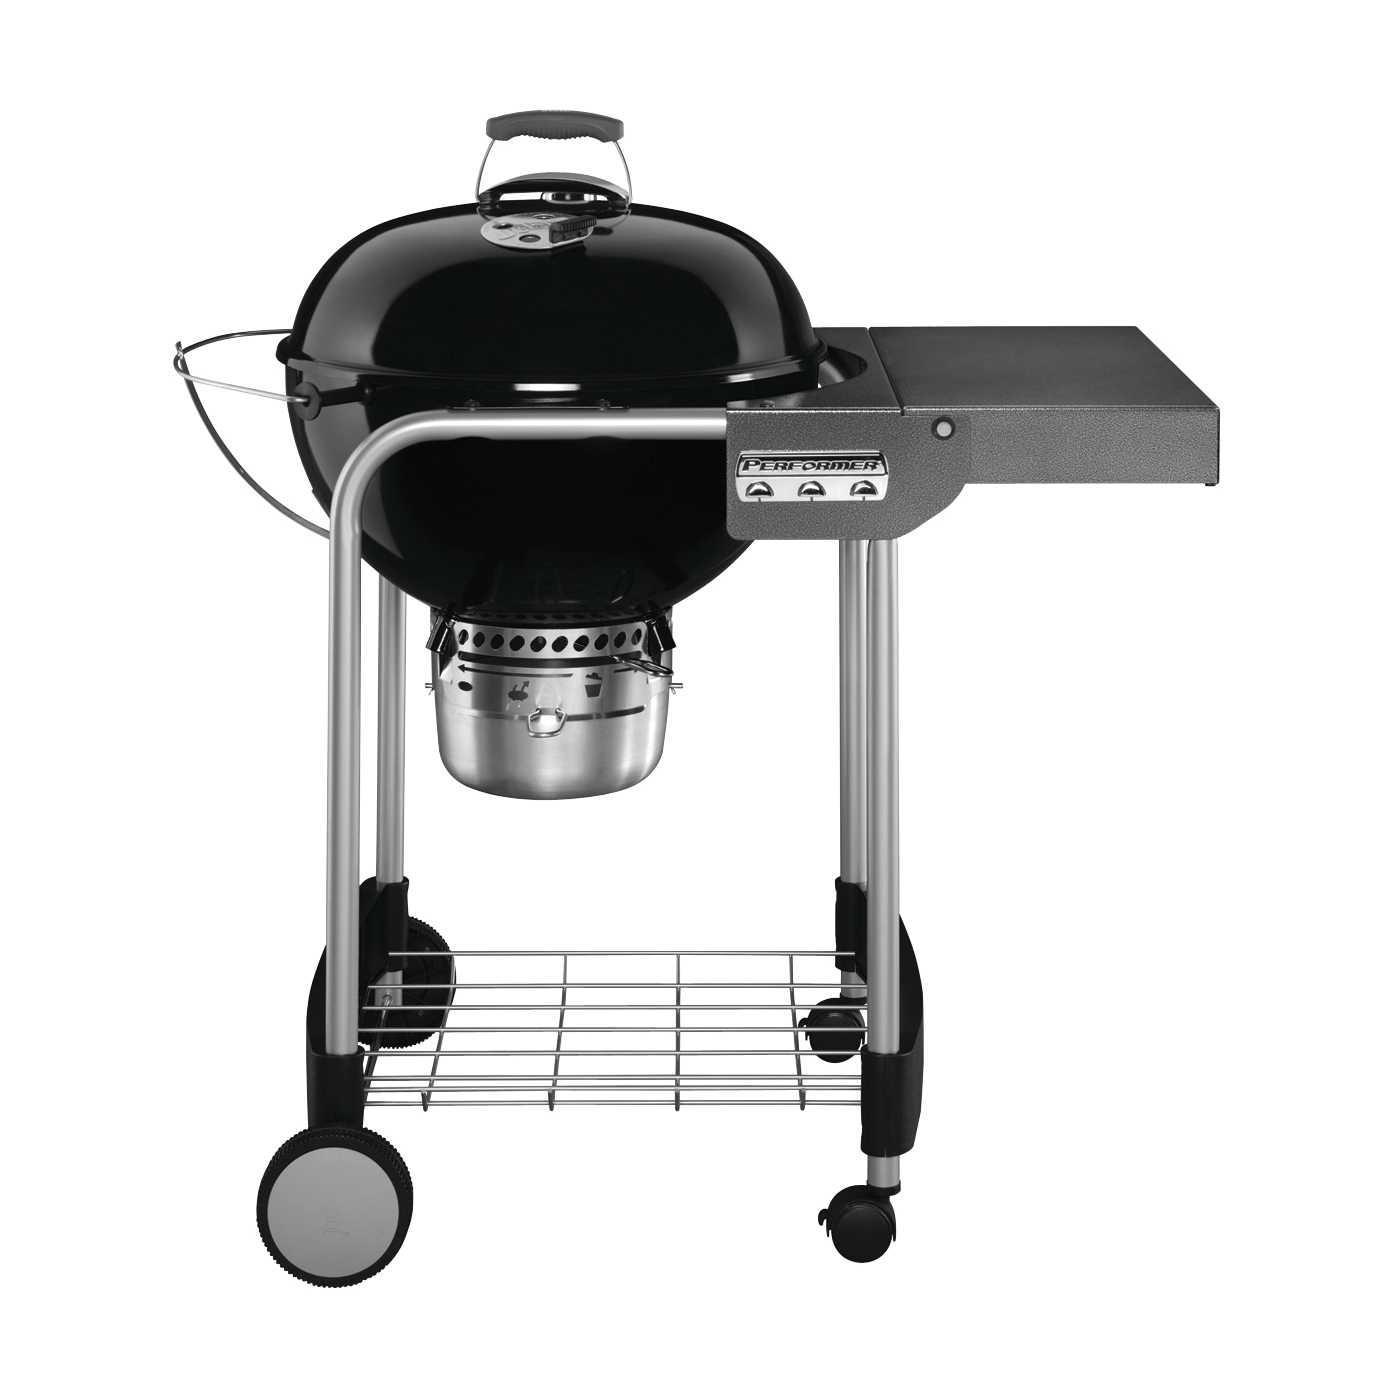 Weber Performer 15301001 Charcoal Grill, 363 sq-in Primary Cooking Surface, Black